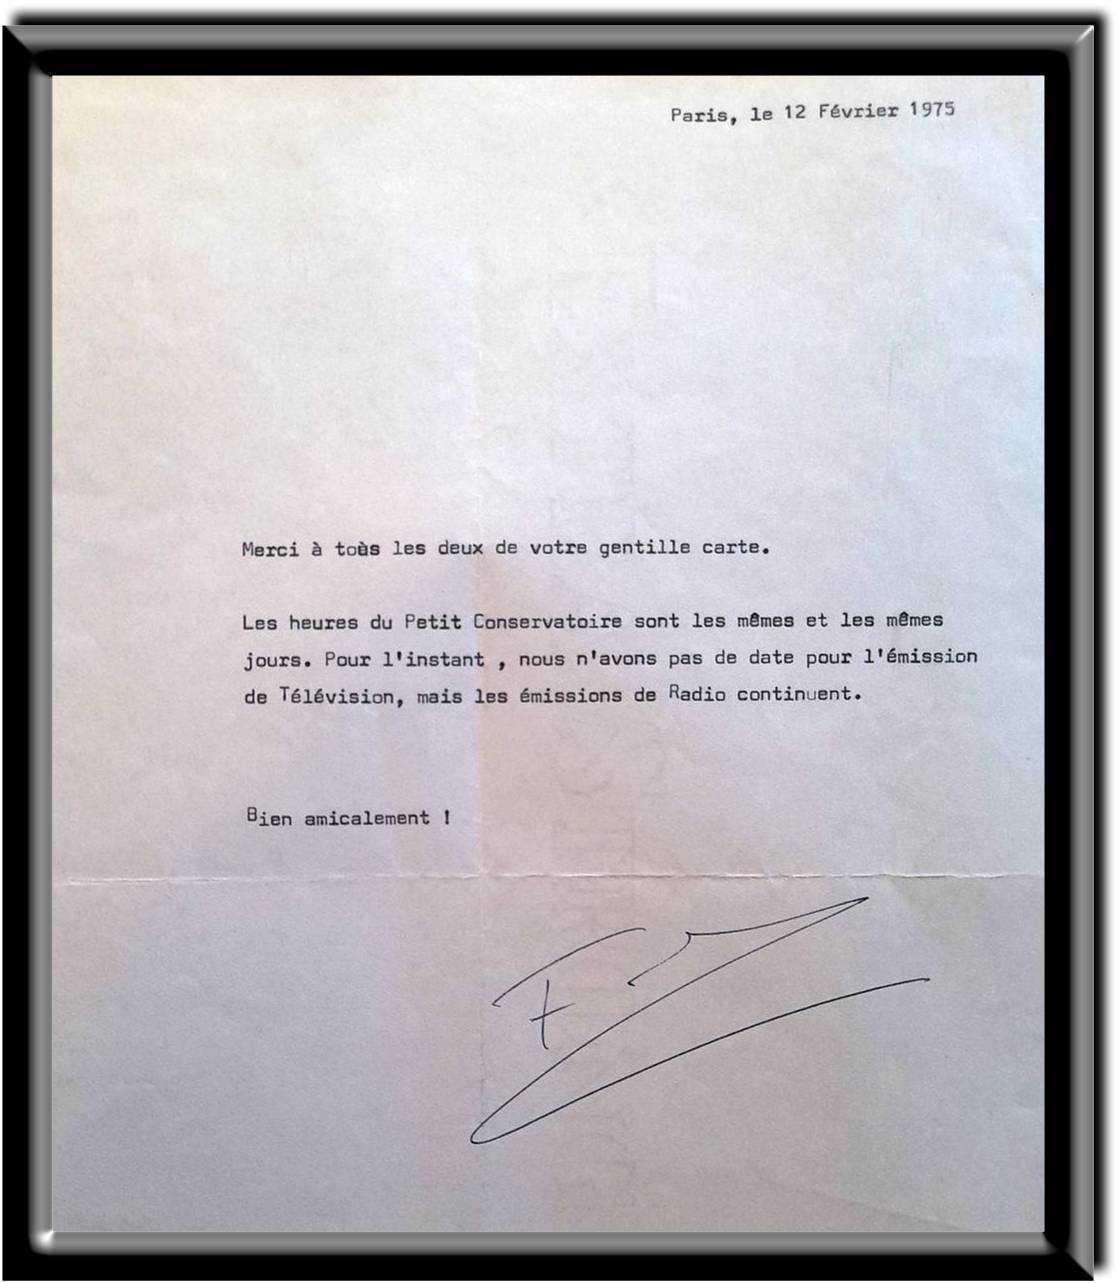 Letter of recommendation about "Le Petit Conservertoire" in French television, February, 1976.